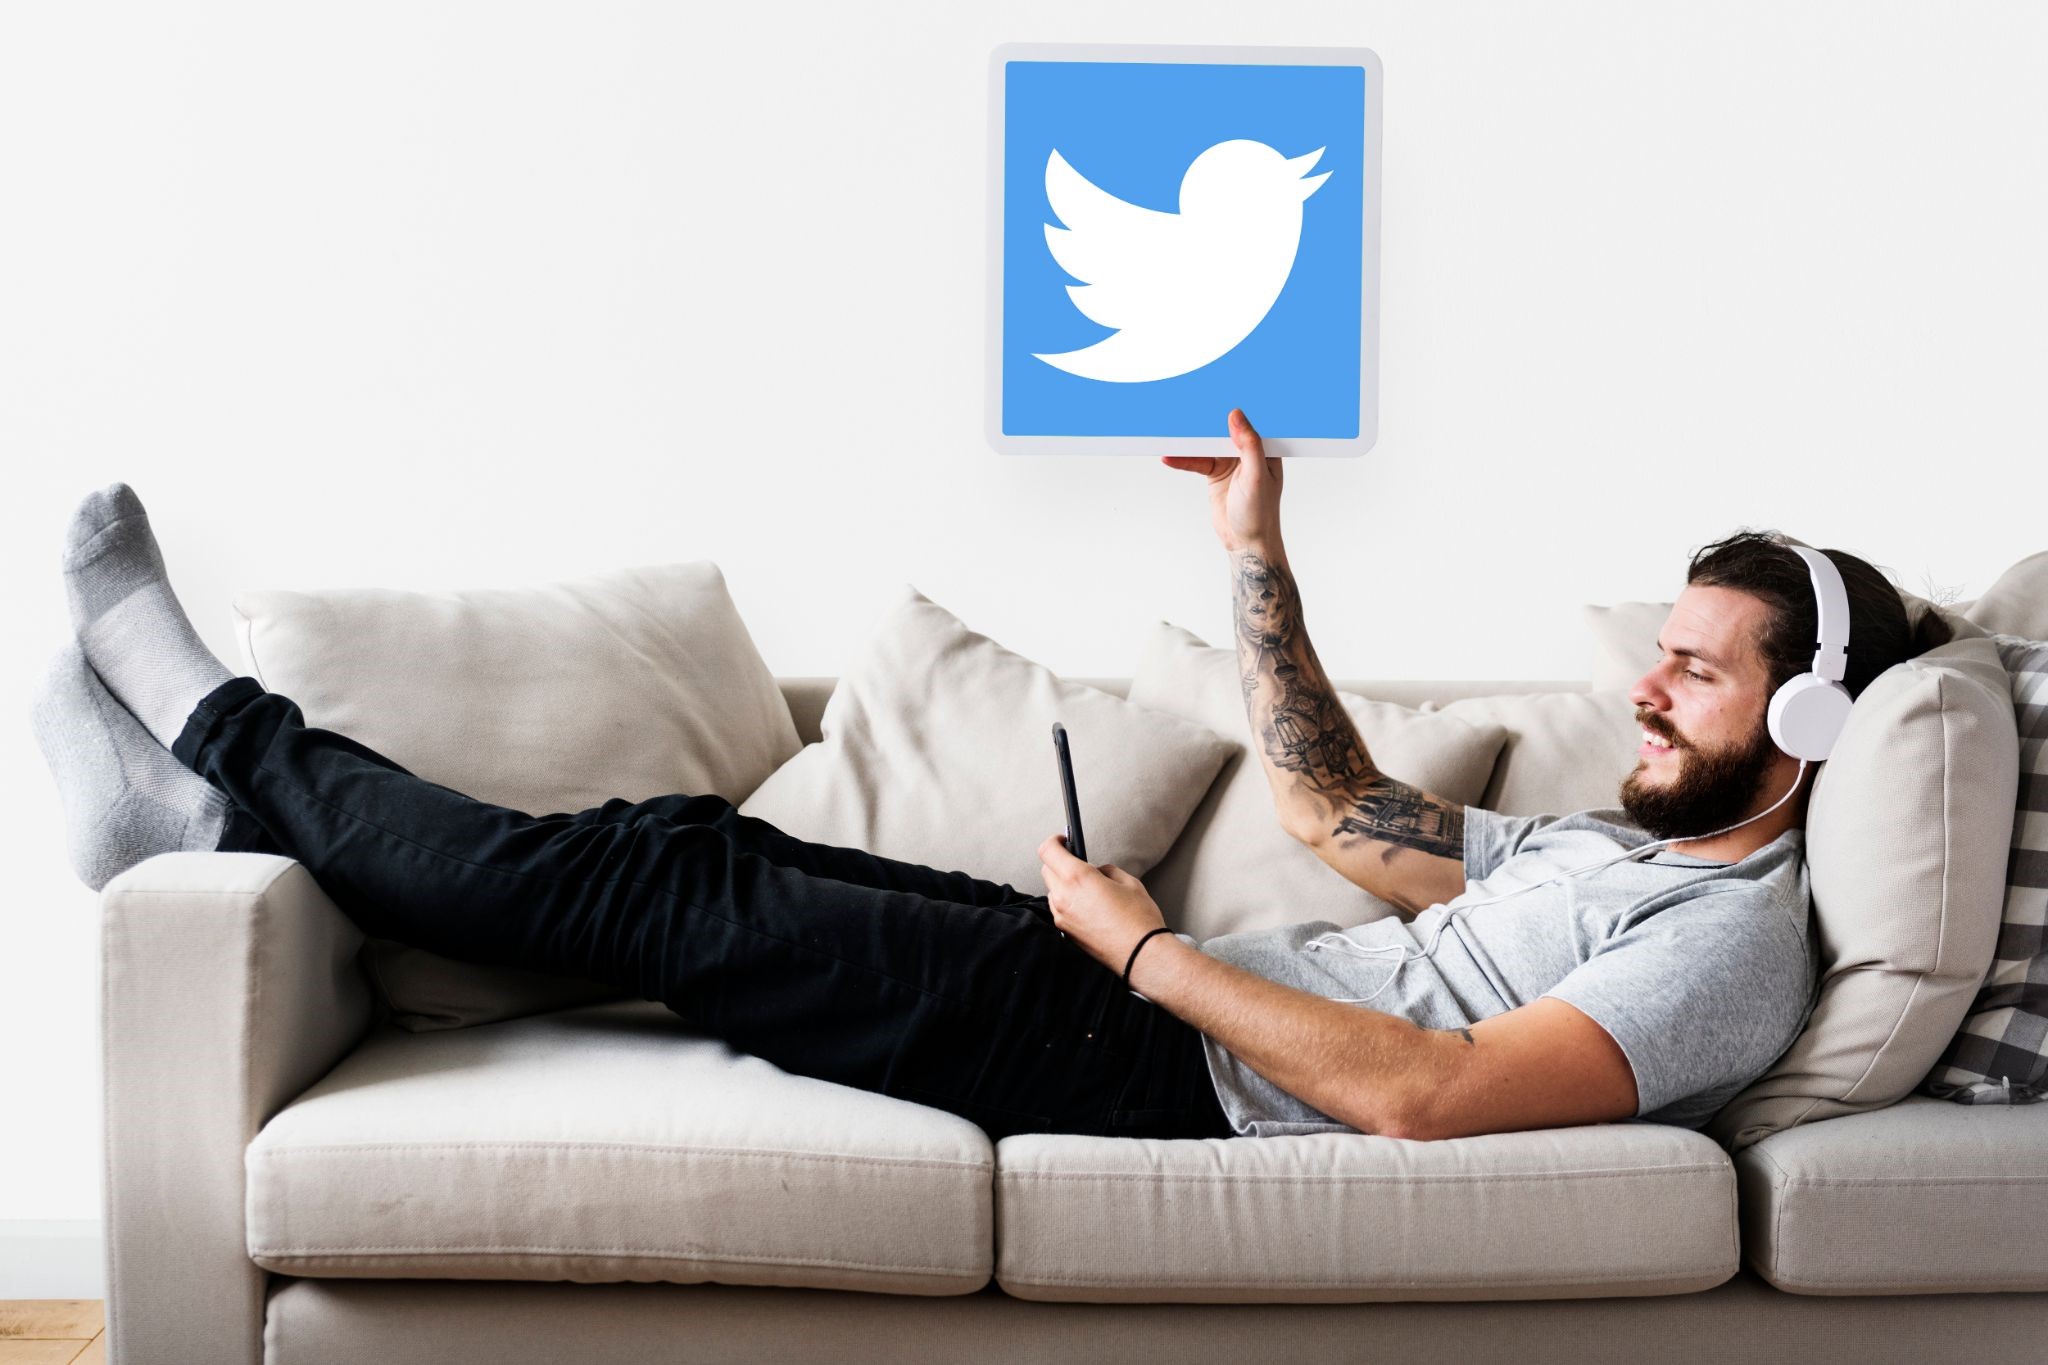 Currently, Twitter Individuals Can Get Their Account Verified: Check The Process To Obtain Blue Tick.